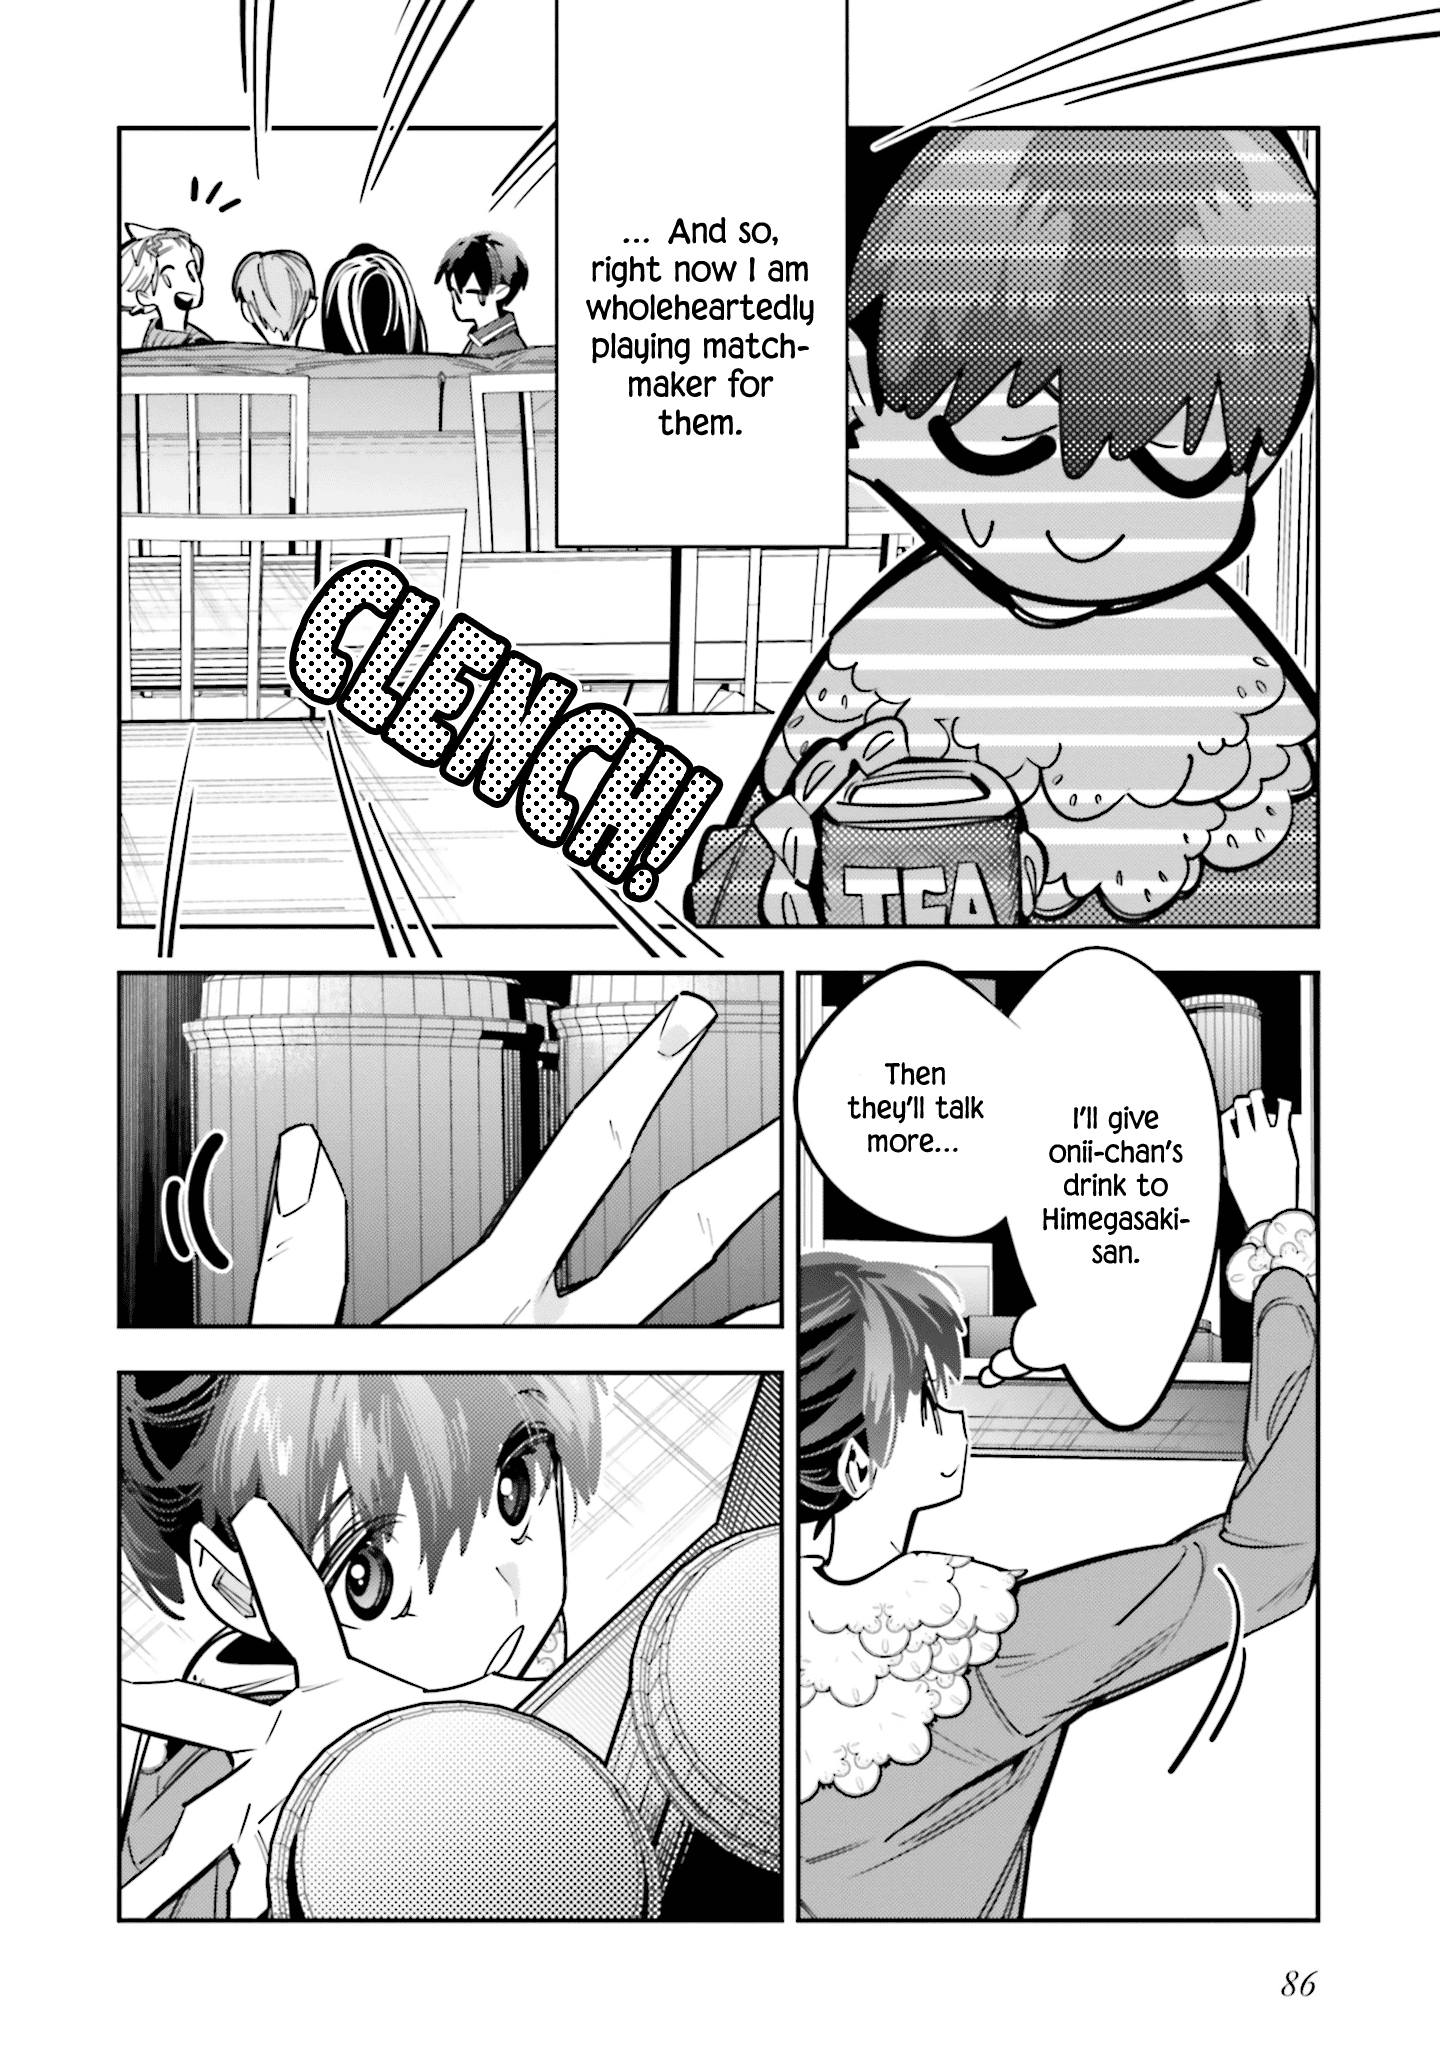 I Reincarnated As The Little Sister Of A Death Game Manga's Murder Mastermind And Failed Chapter 7 #16